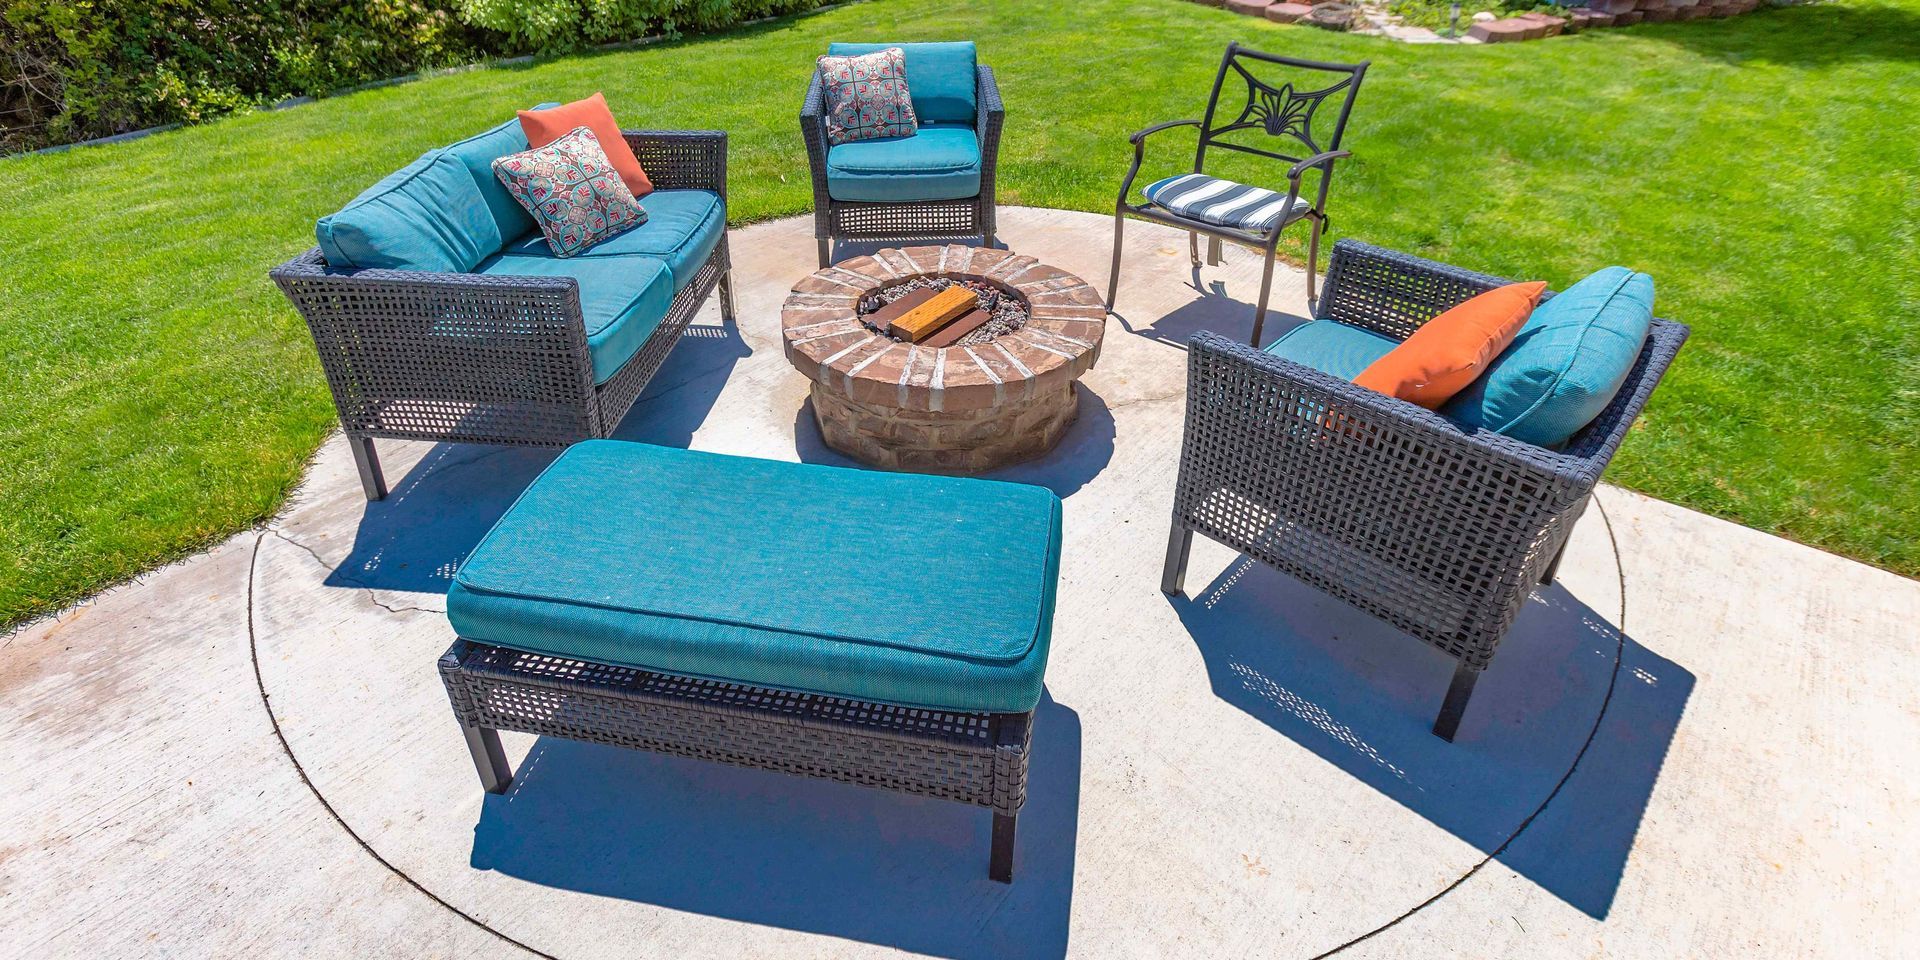 Outdoor living space surrounding a fire pit.